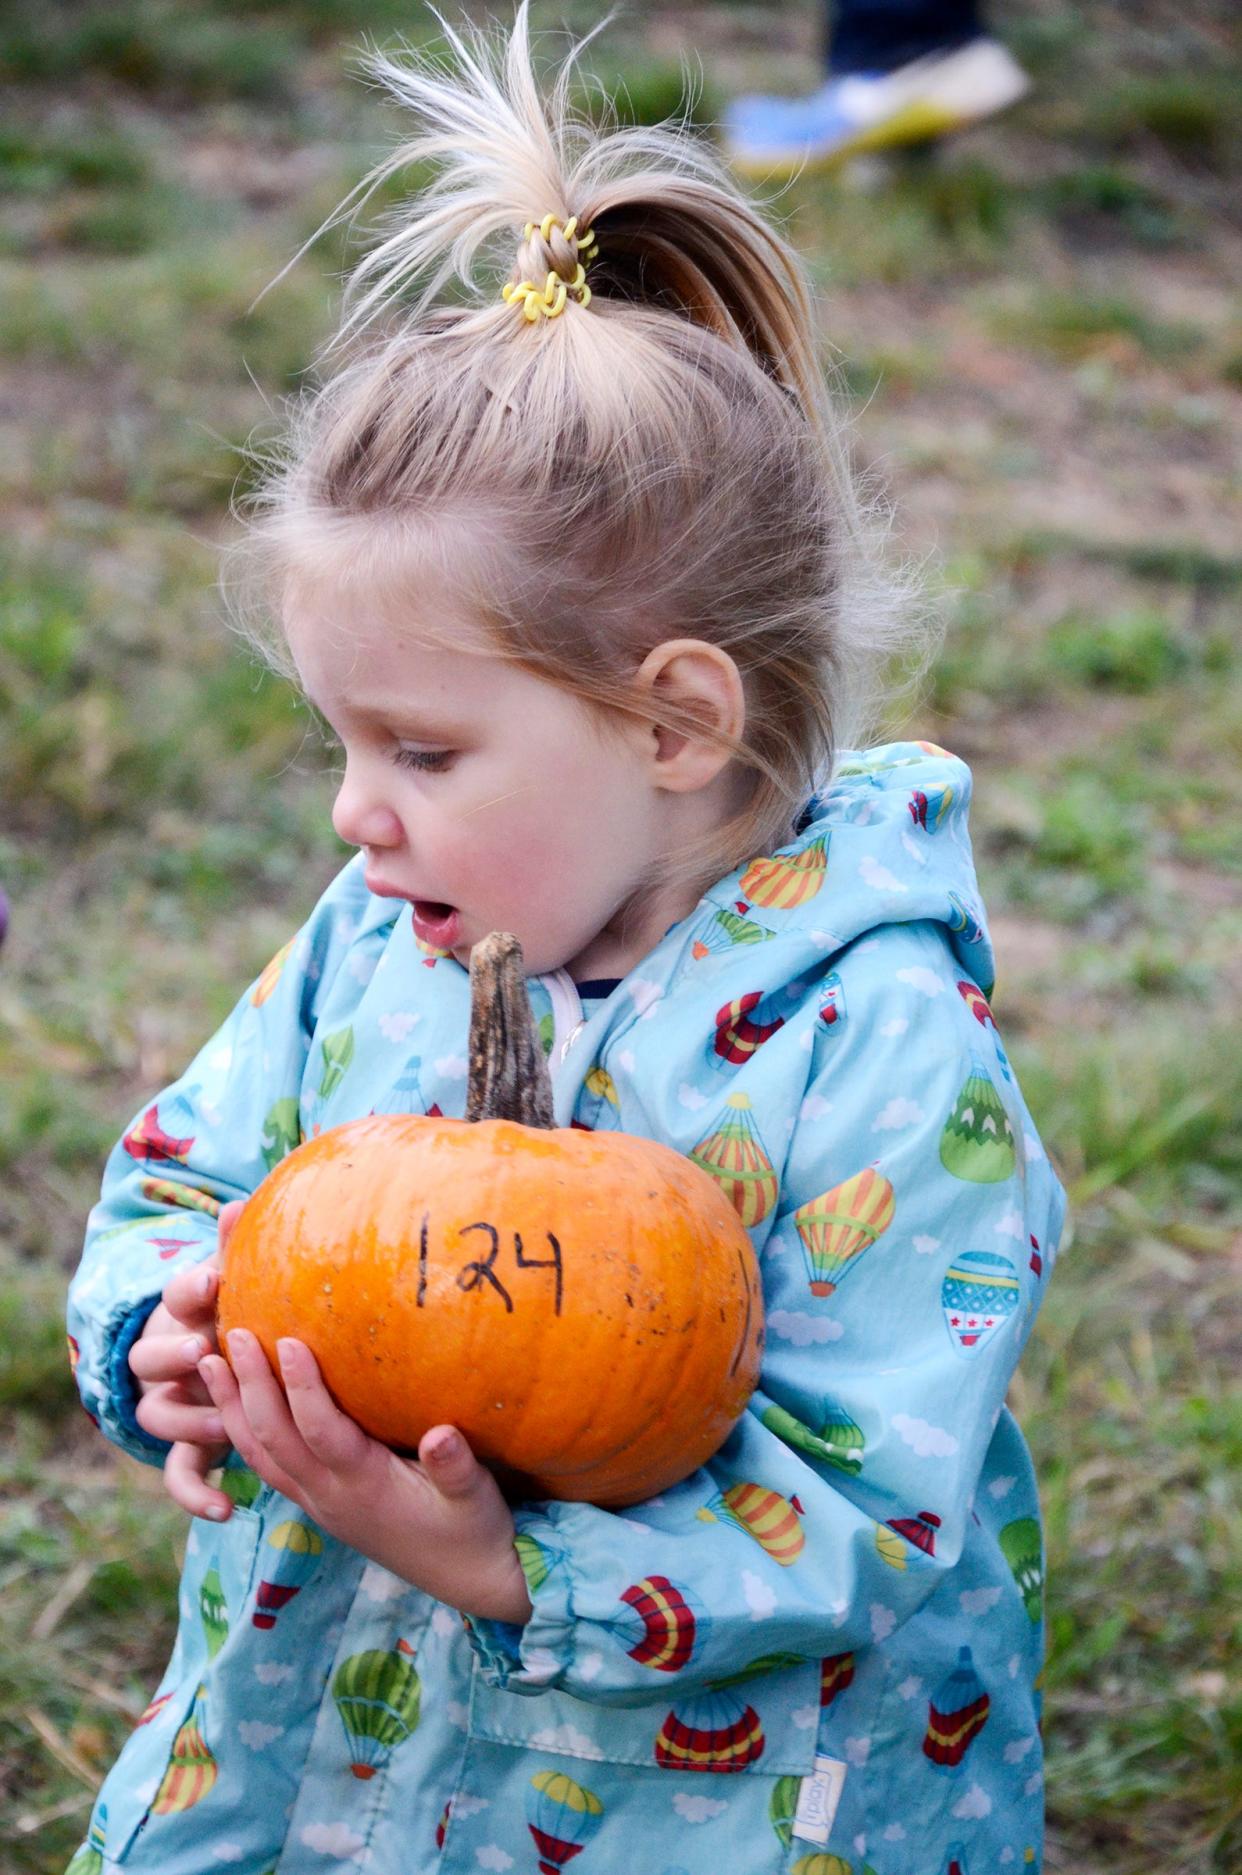 Letti Taylor, 2, from Boyne City picks out the perfect pumpkin to take home during the Rotary Club of Petoskey's Fall Fest at the Winter Sports Park in 2021.